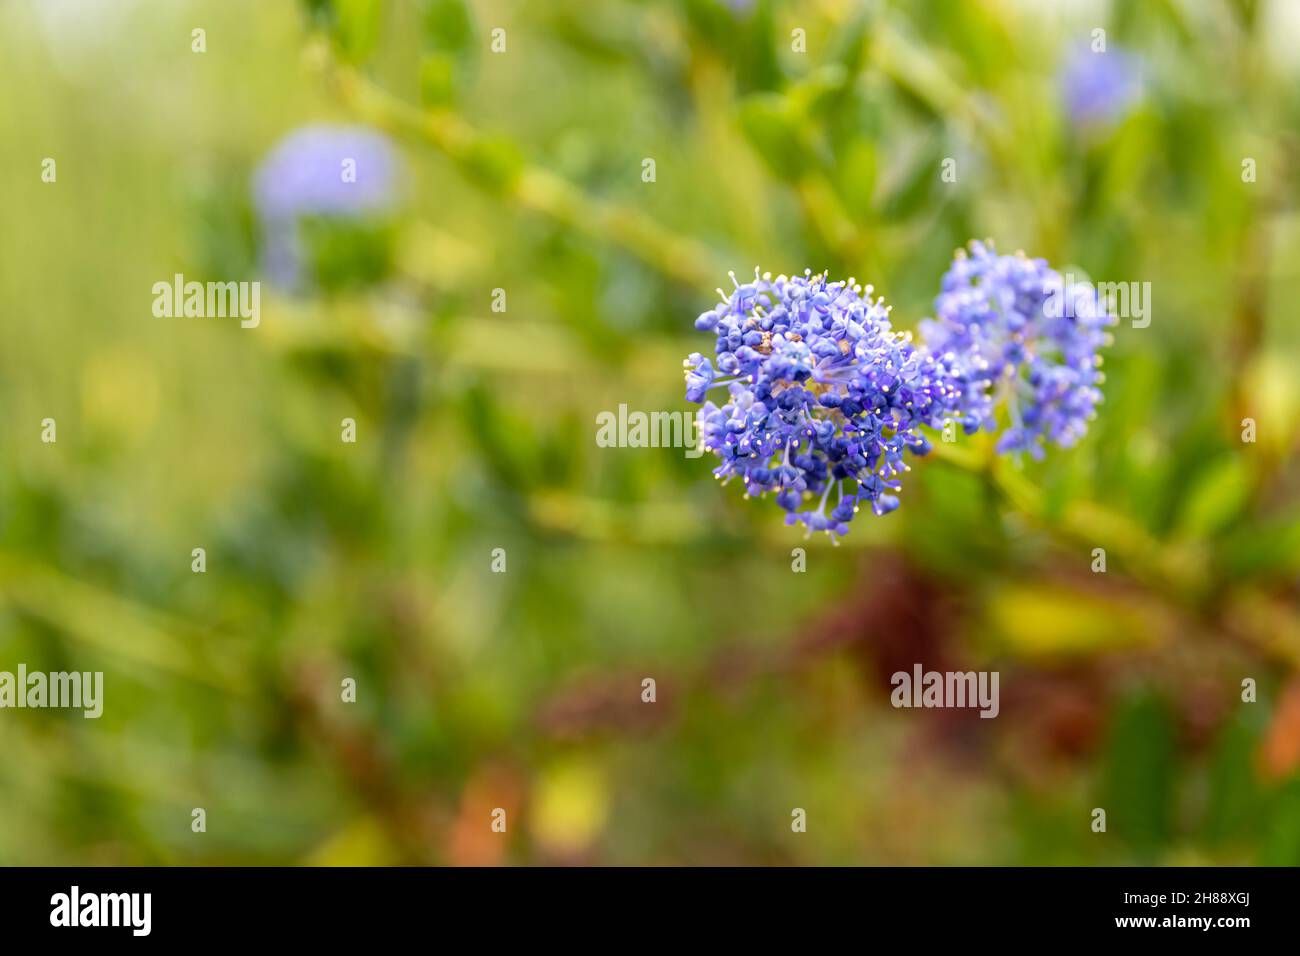 A closeup shot of Ceanothus impressus 'Victoria' flowers blooming in the garden on green background Stock Photo